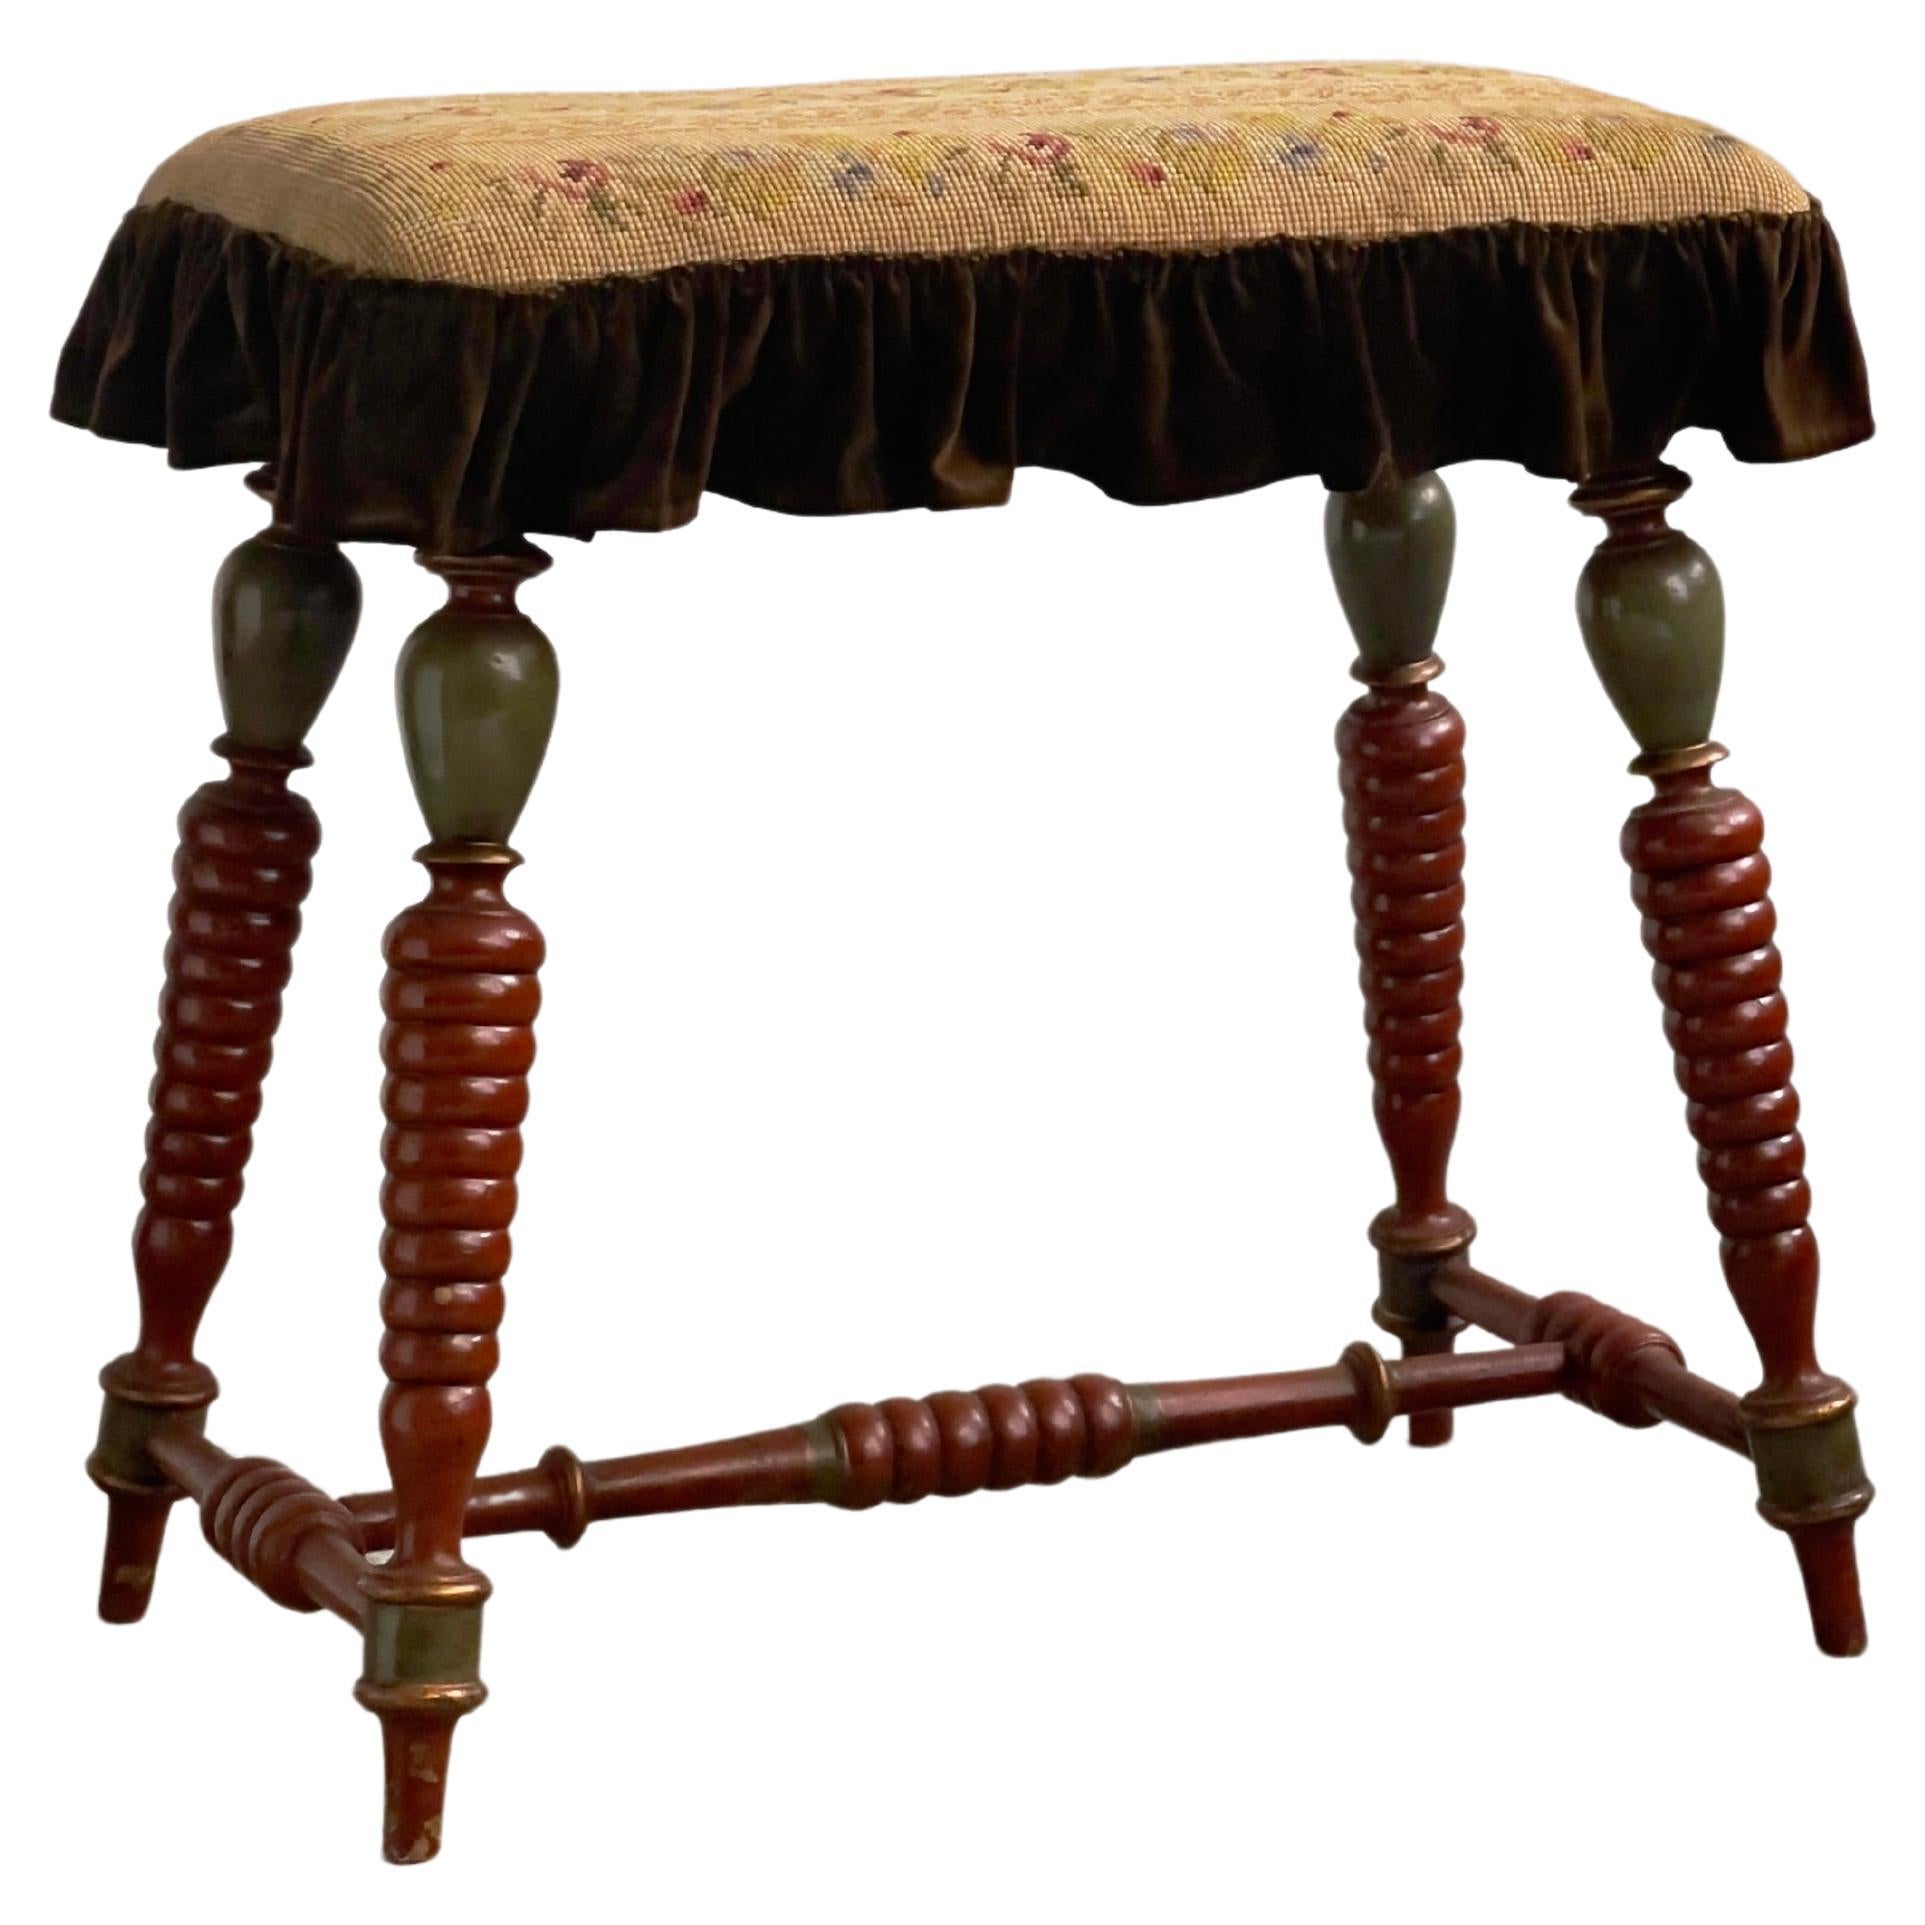 Danish Late 19th century Stool with carved painted legs and embroidered seat.